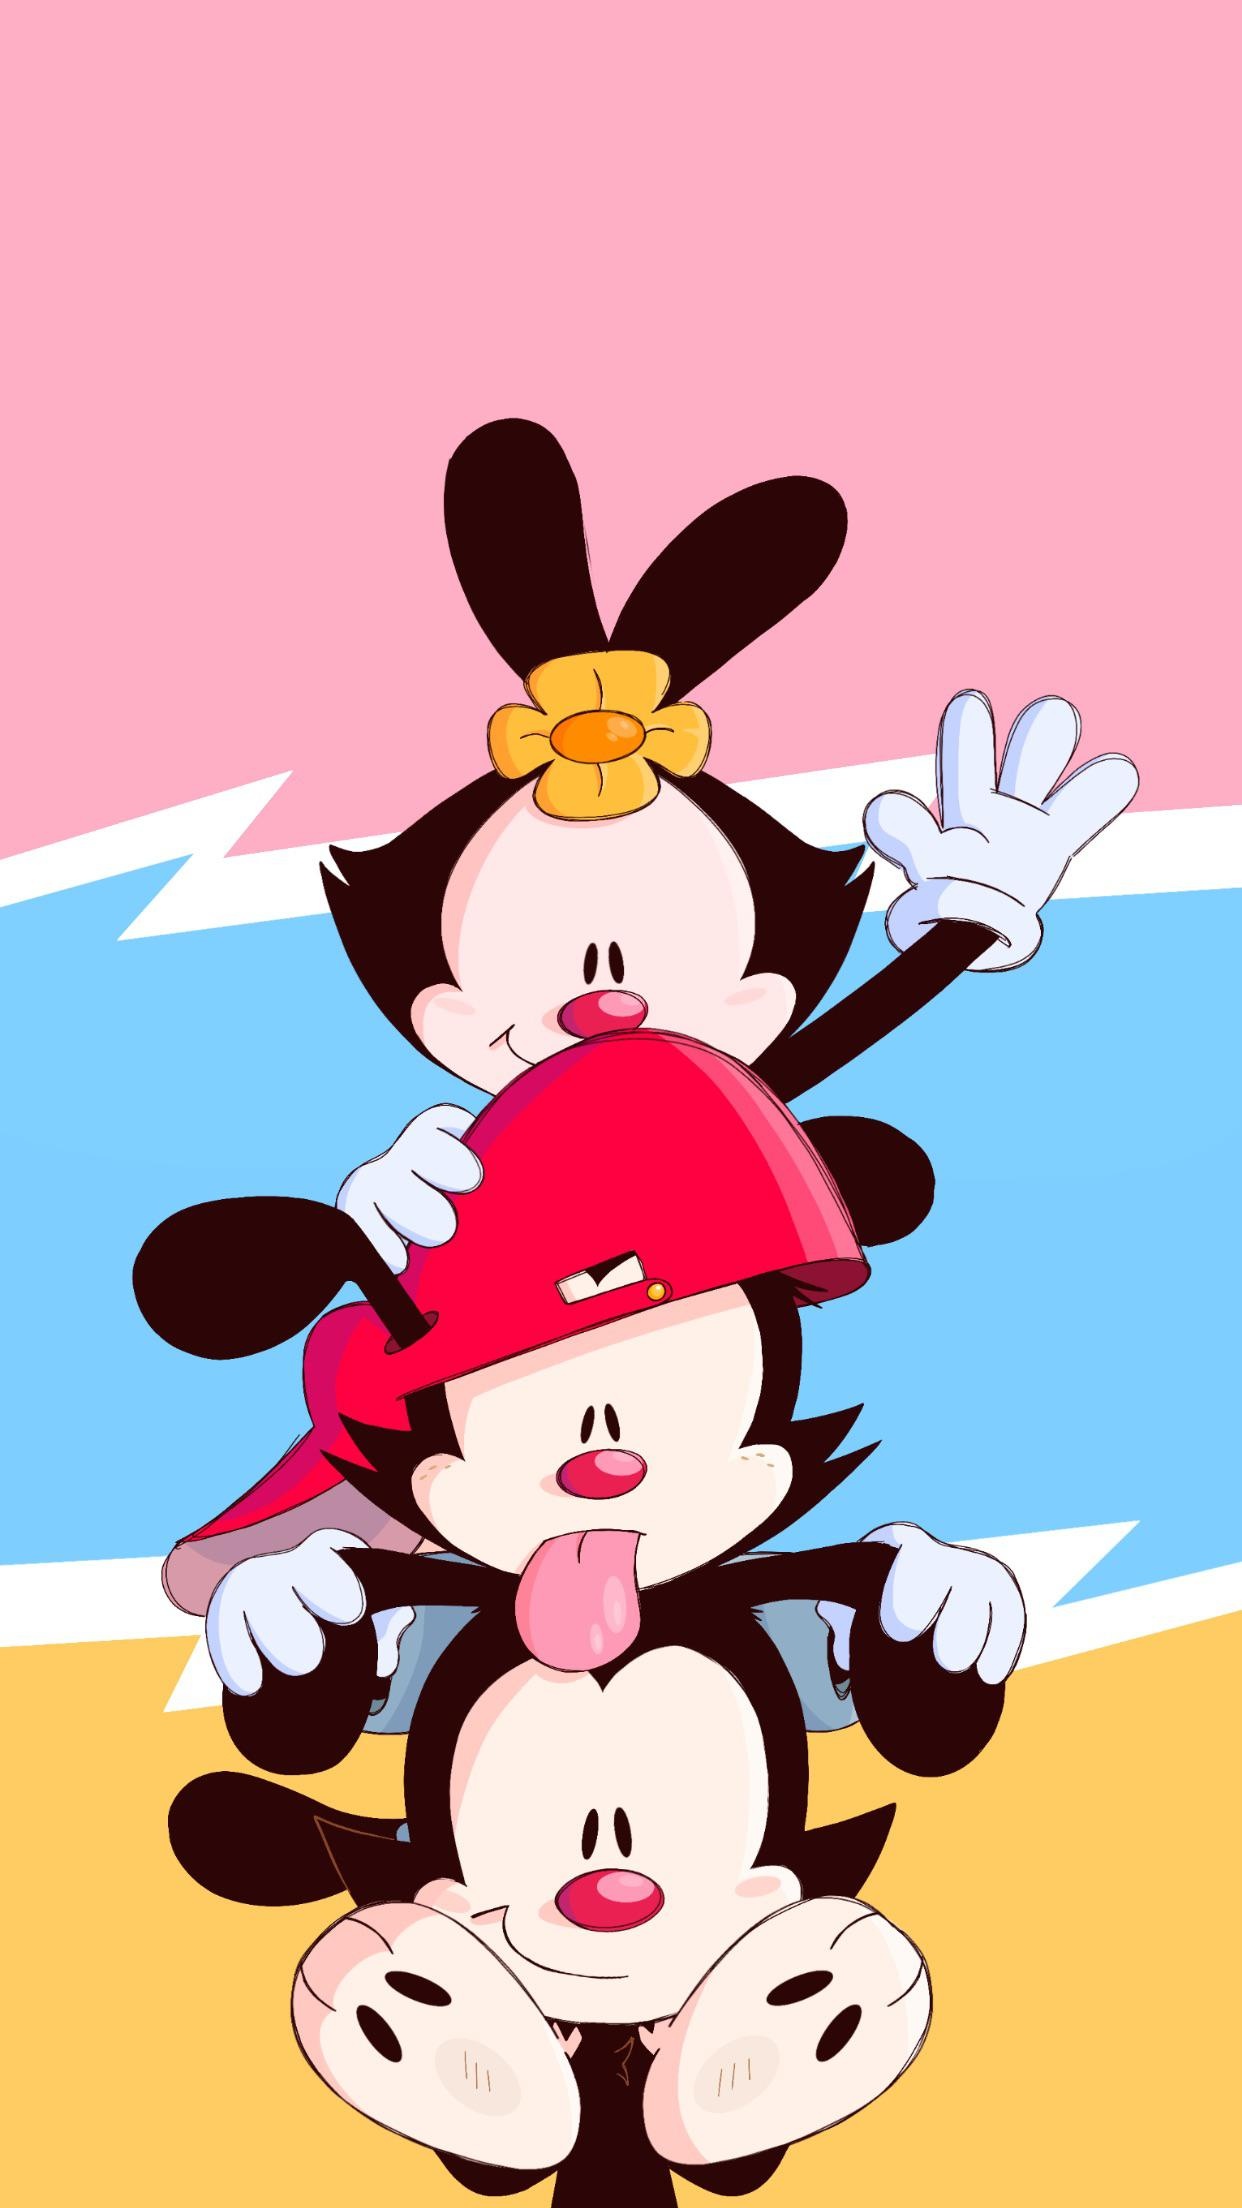 iPhone wallpapers for Animaniacs, Creative fan designs, 1250x2210 HD Phone